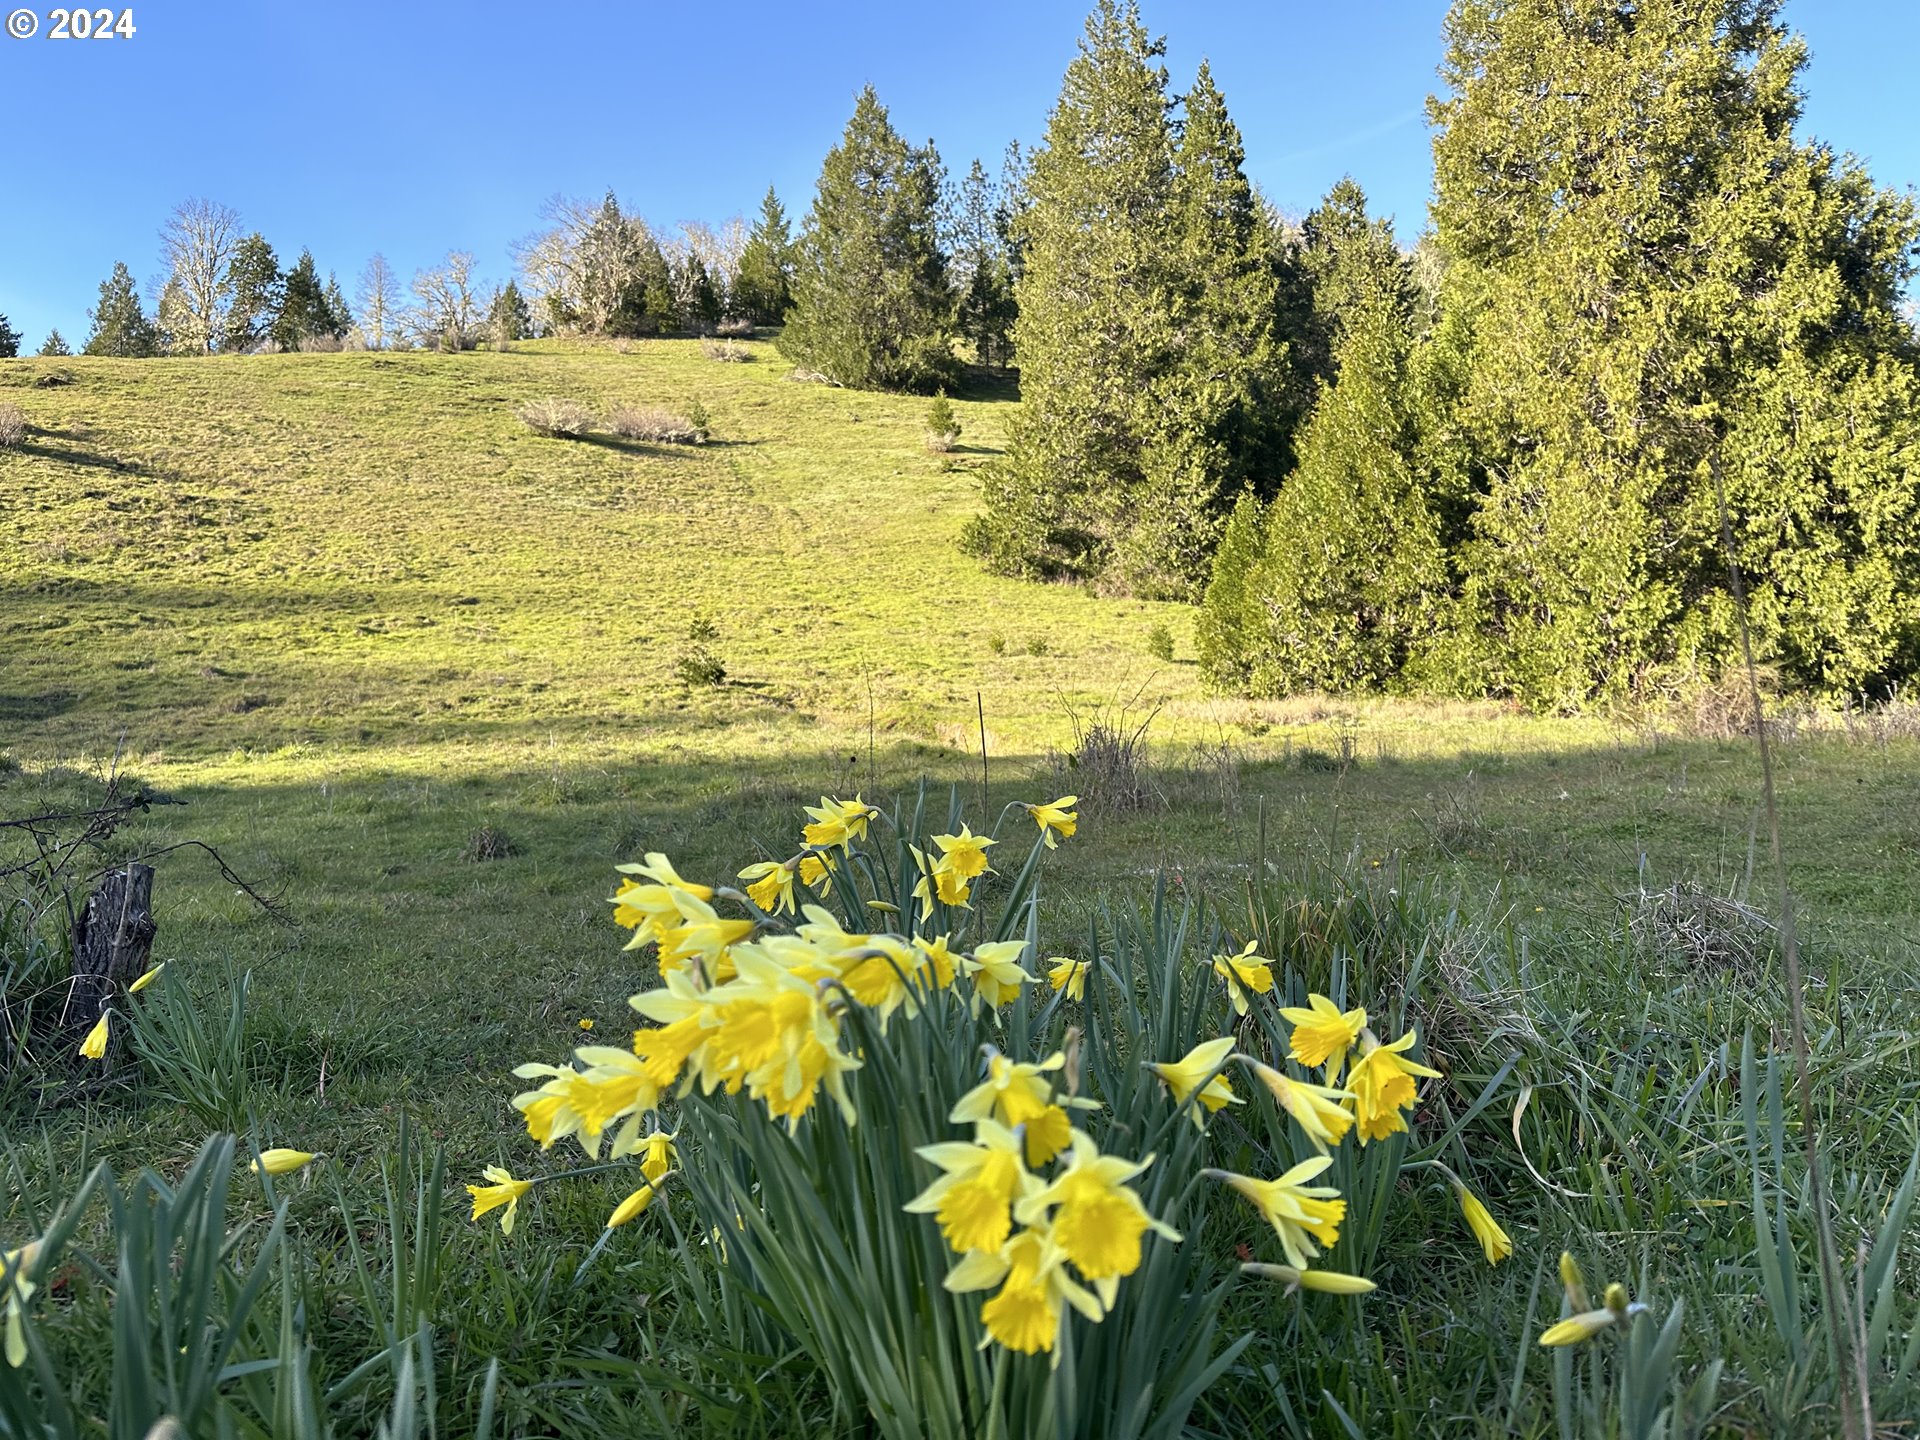 2051 SIBOLD CANYON RD, Tenmile, OR 97481